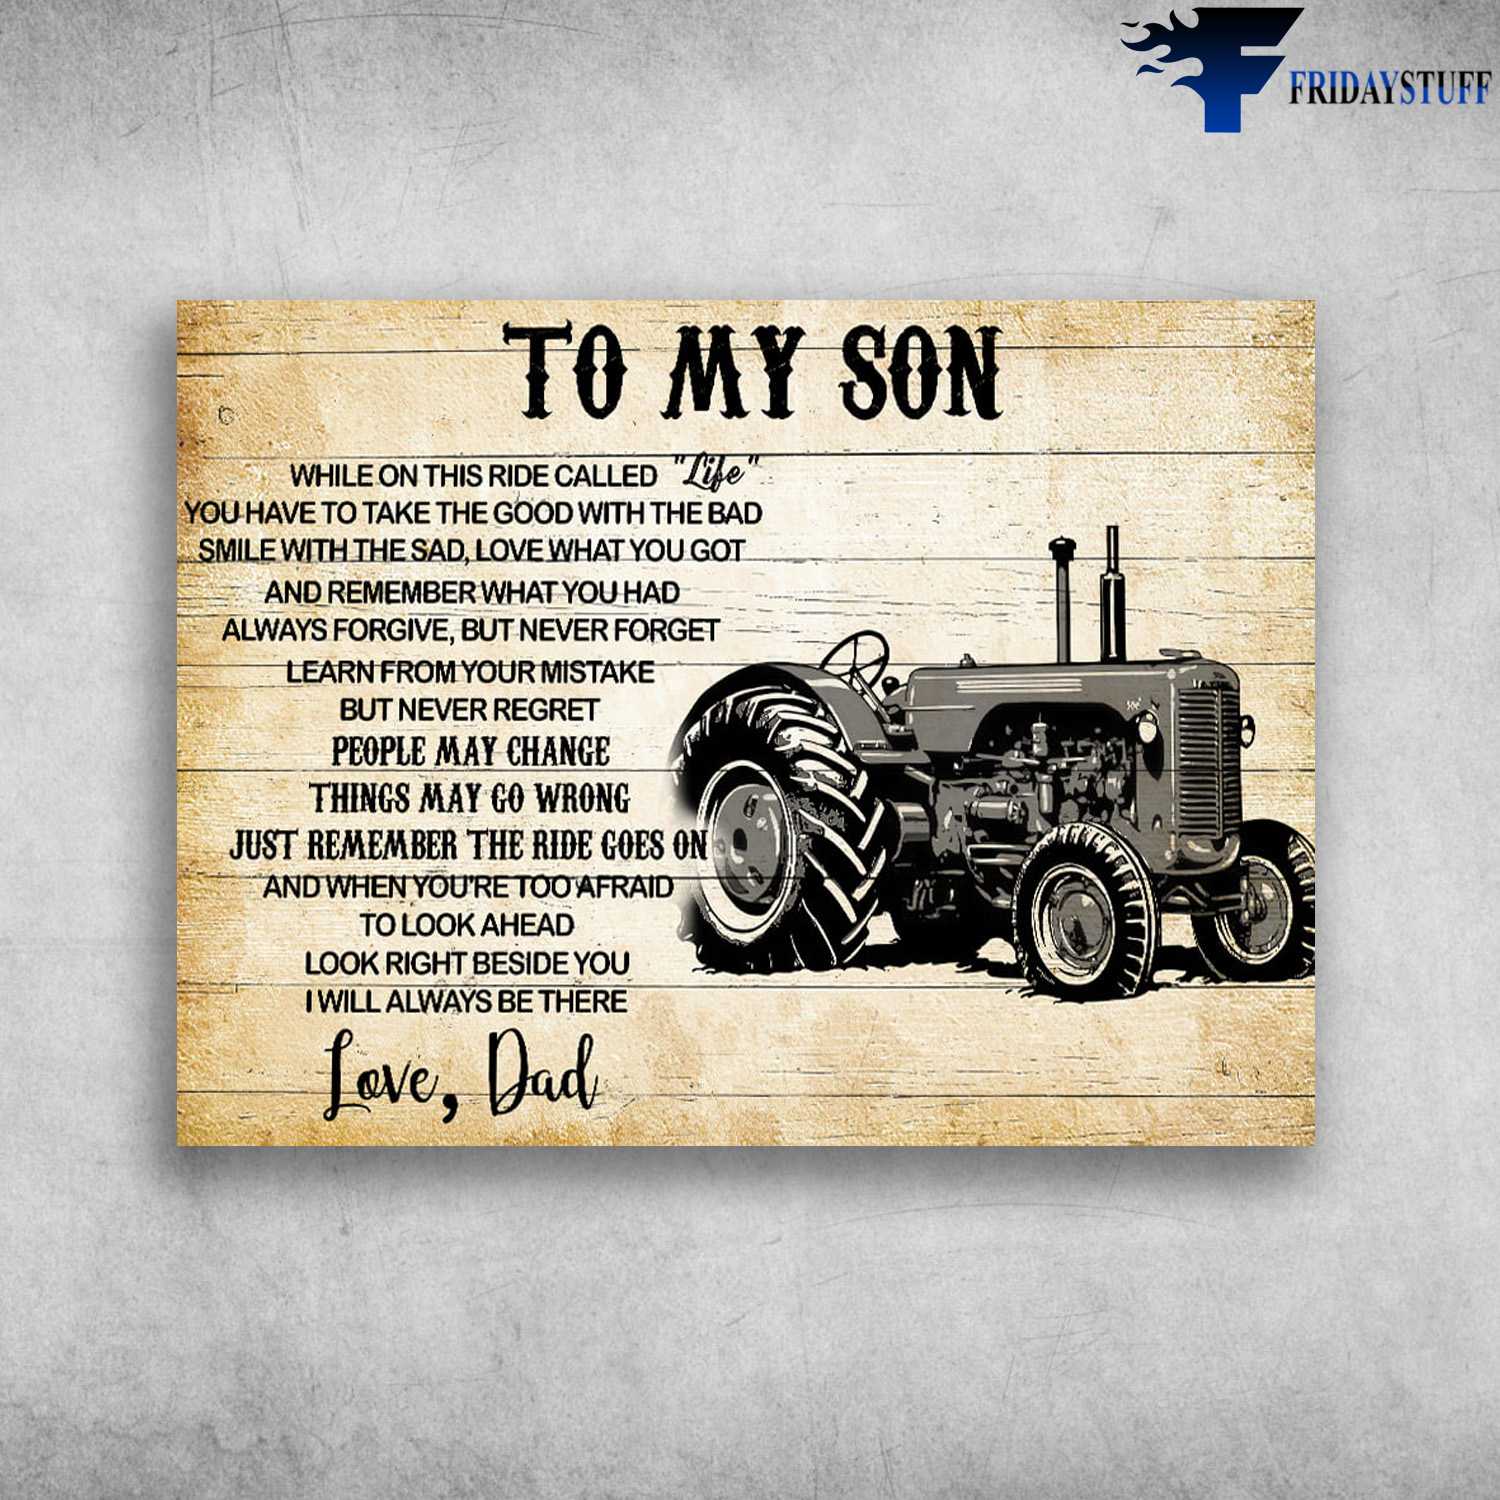 Farm Tractor - To My Son, While On This Ride Called Life, You Have To Take The Good With The Bad, Smile With The Sad, Love What You Got